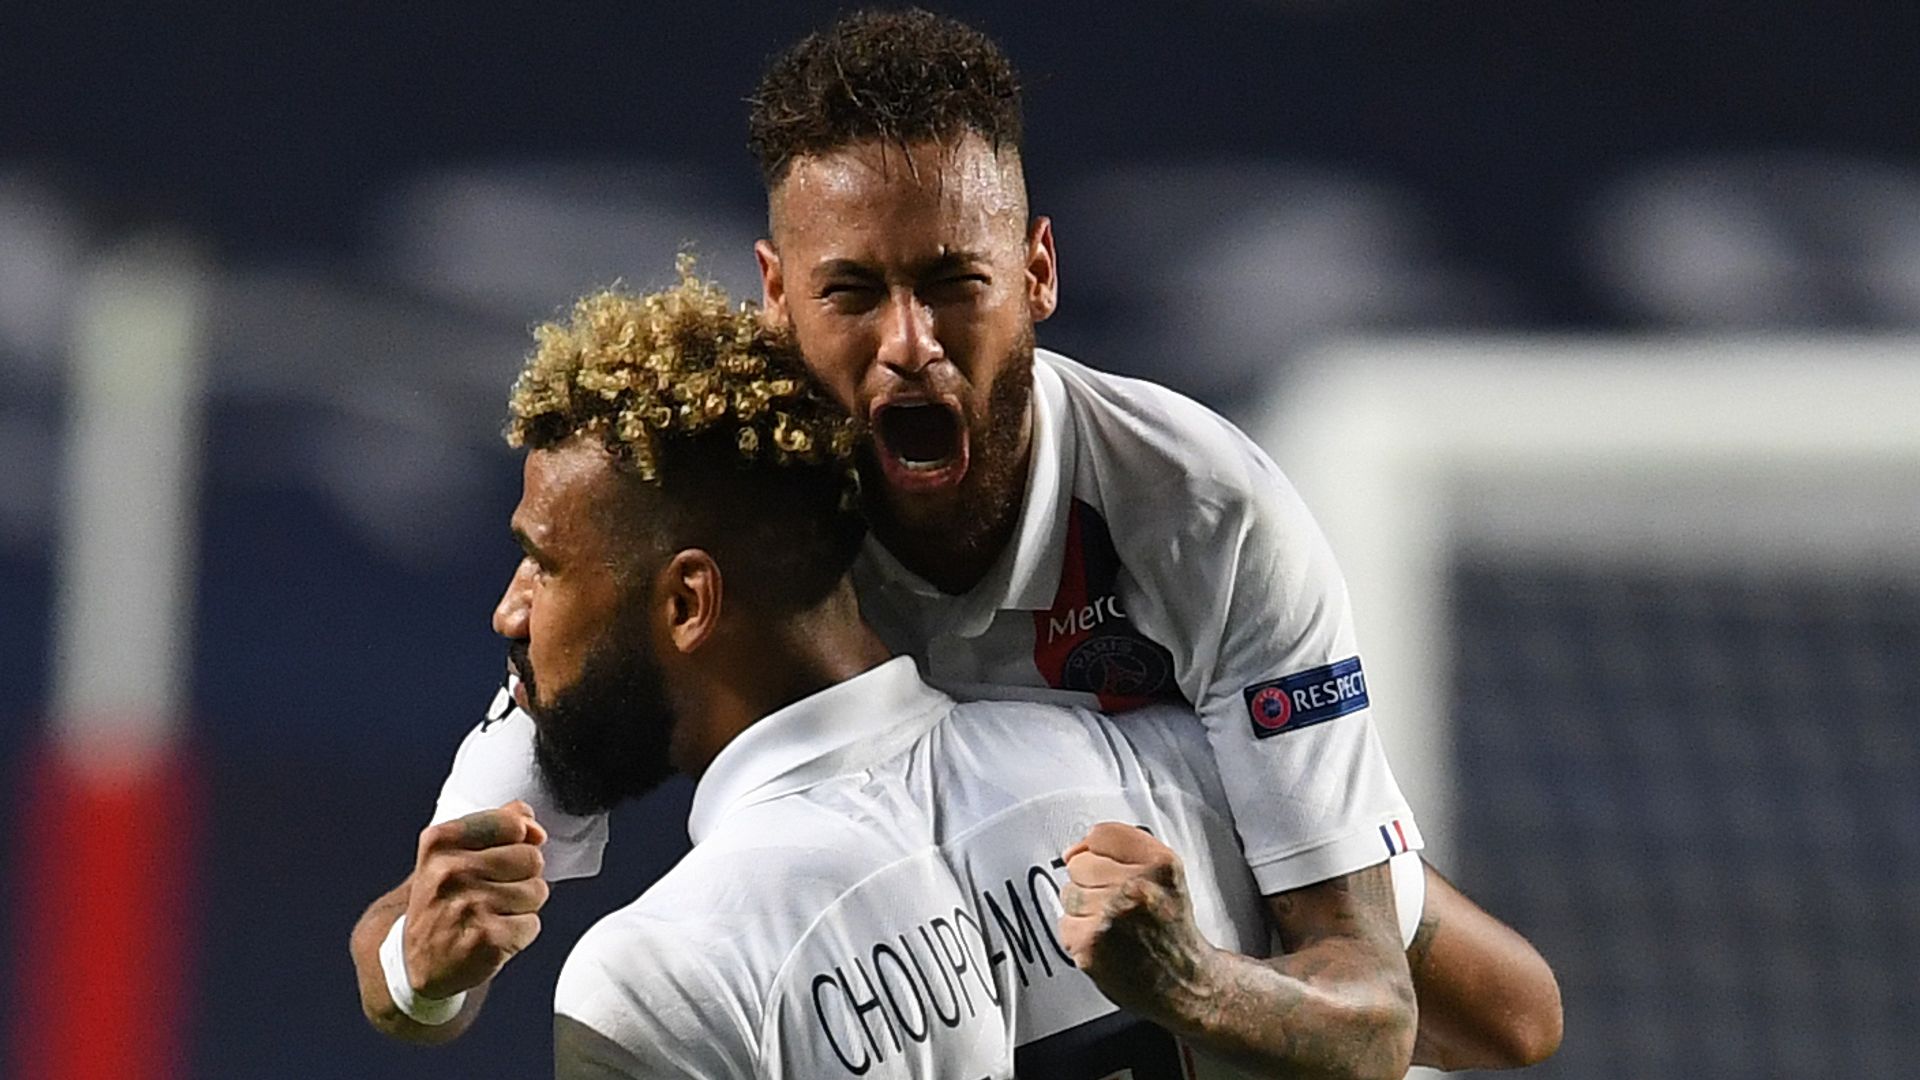 PSG stage stunning late comeback to reach CL semis